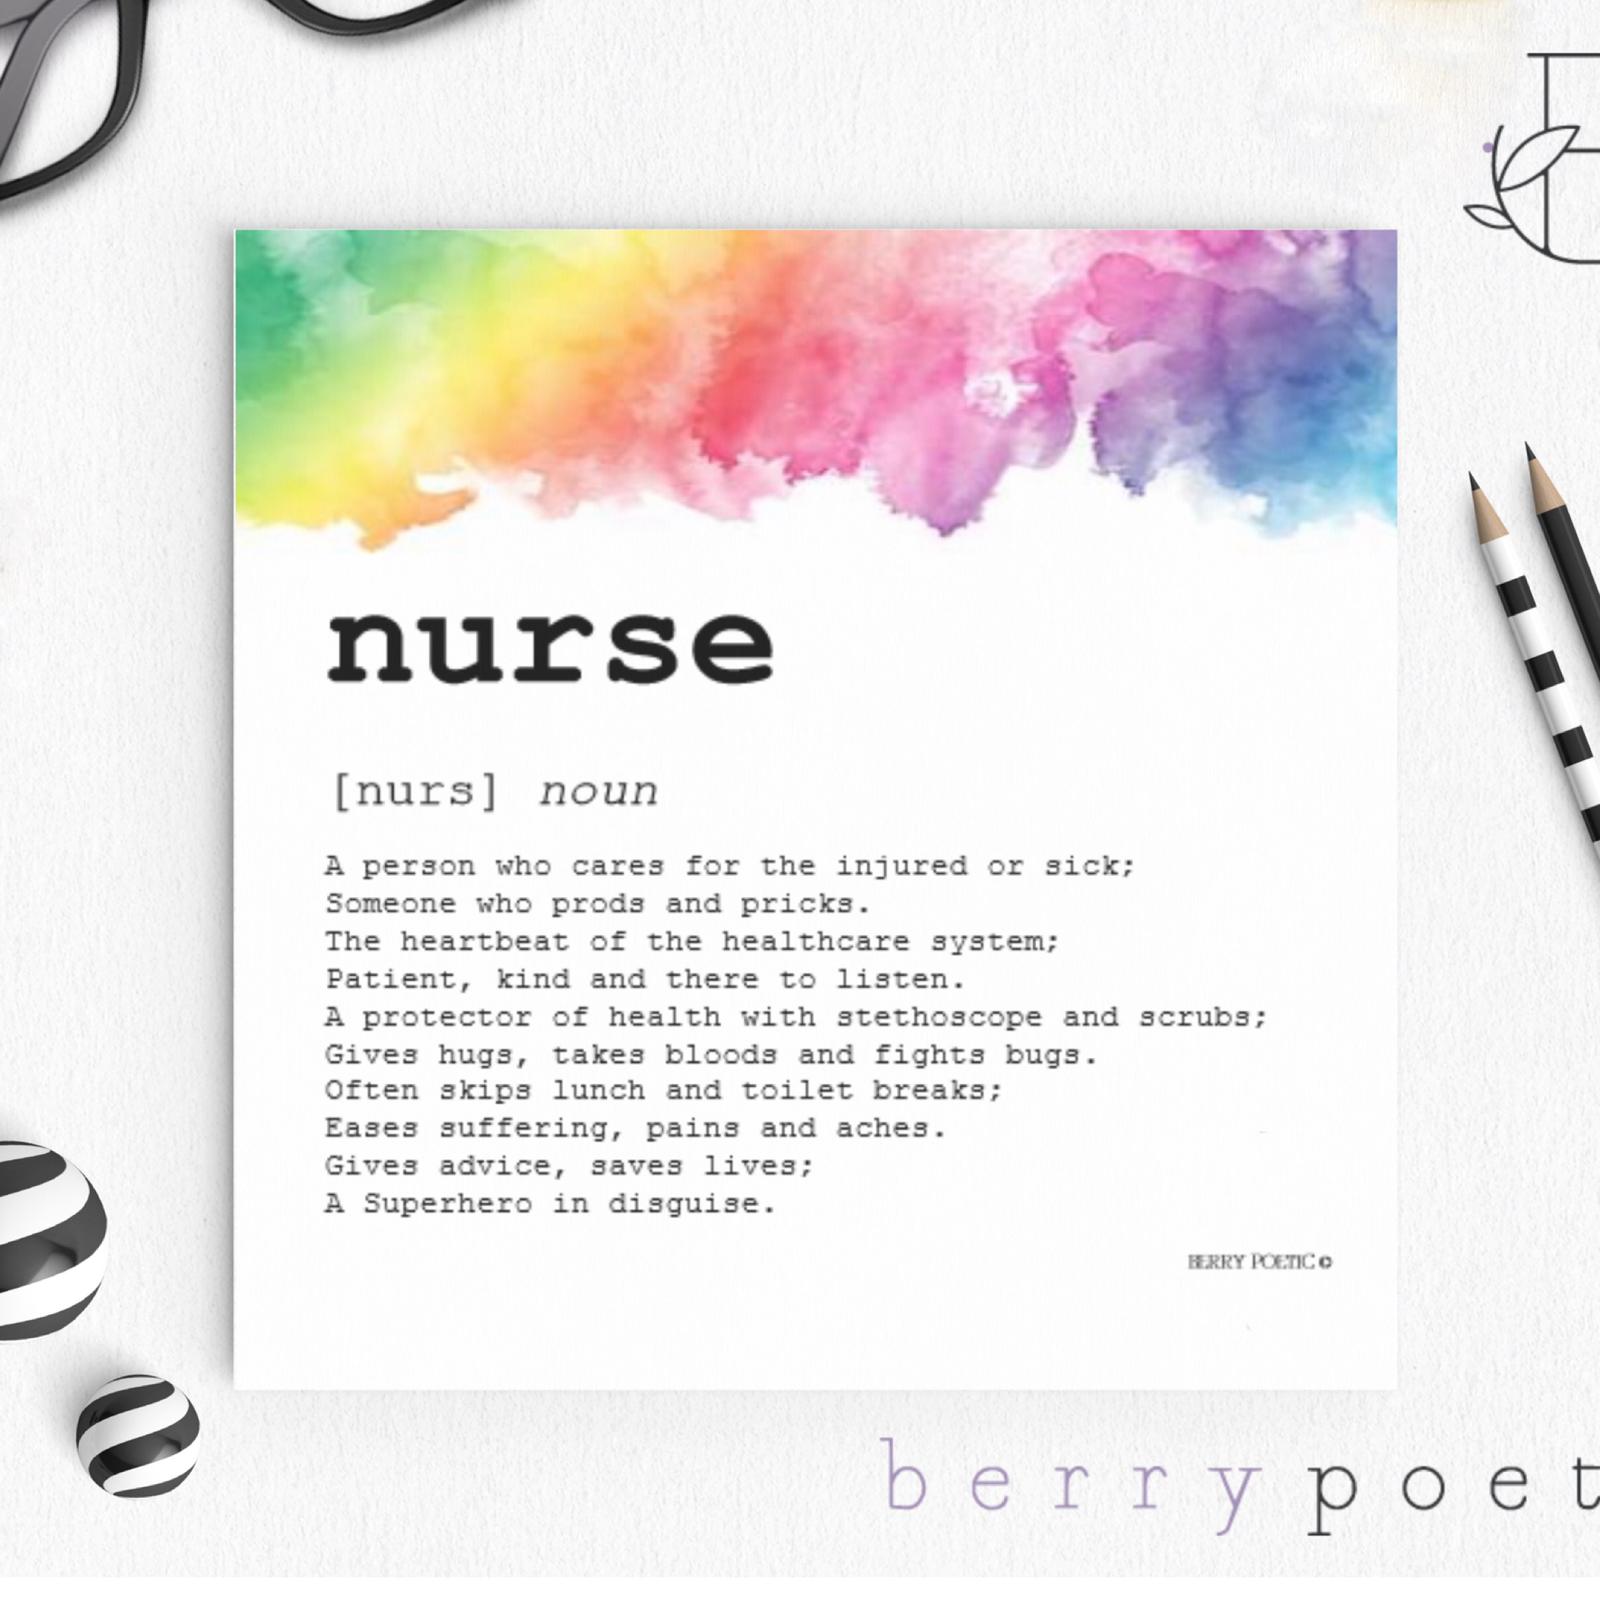 Southport poet Fiona Berry has launched a series of postcards and A4 prints thanking Nurses, Doctors, Key Workers and Teachers for their work and sacrifice during the coronavirus outbreak